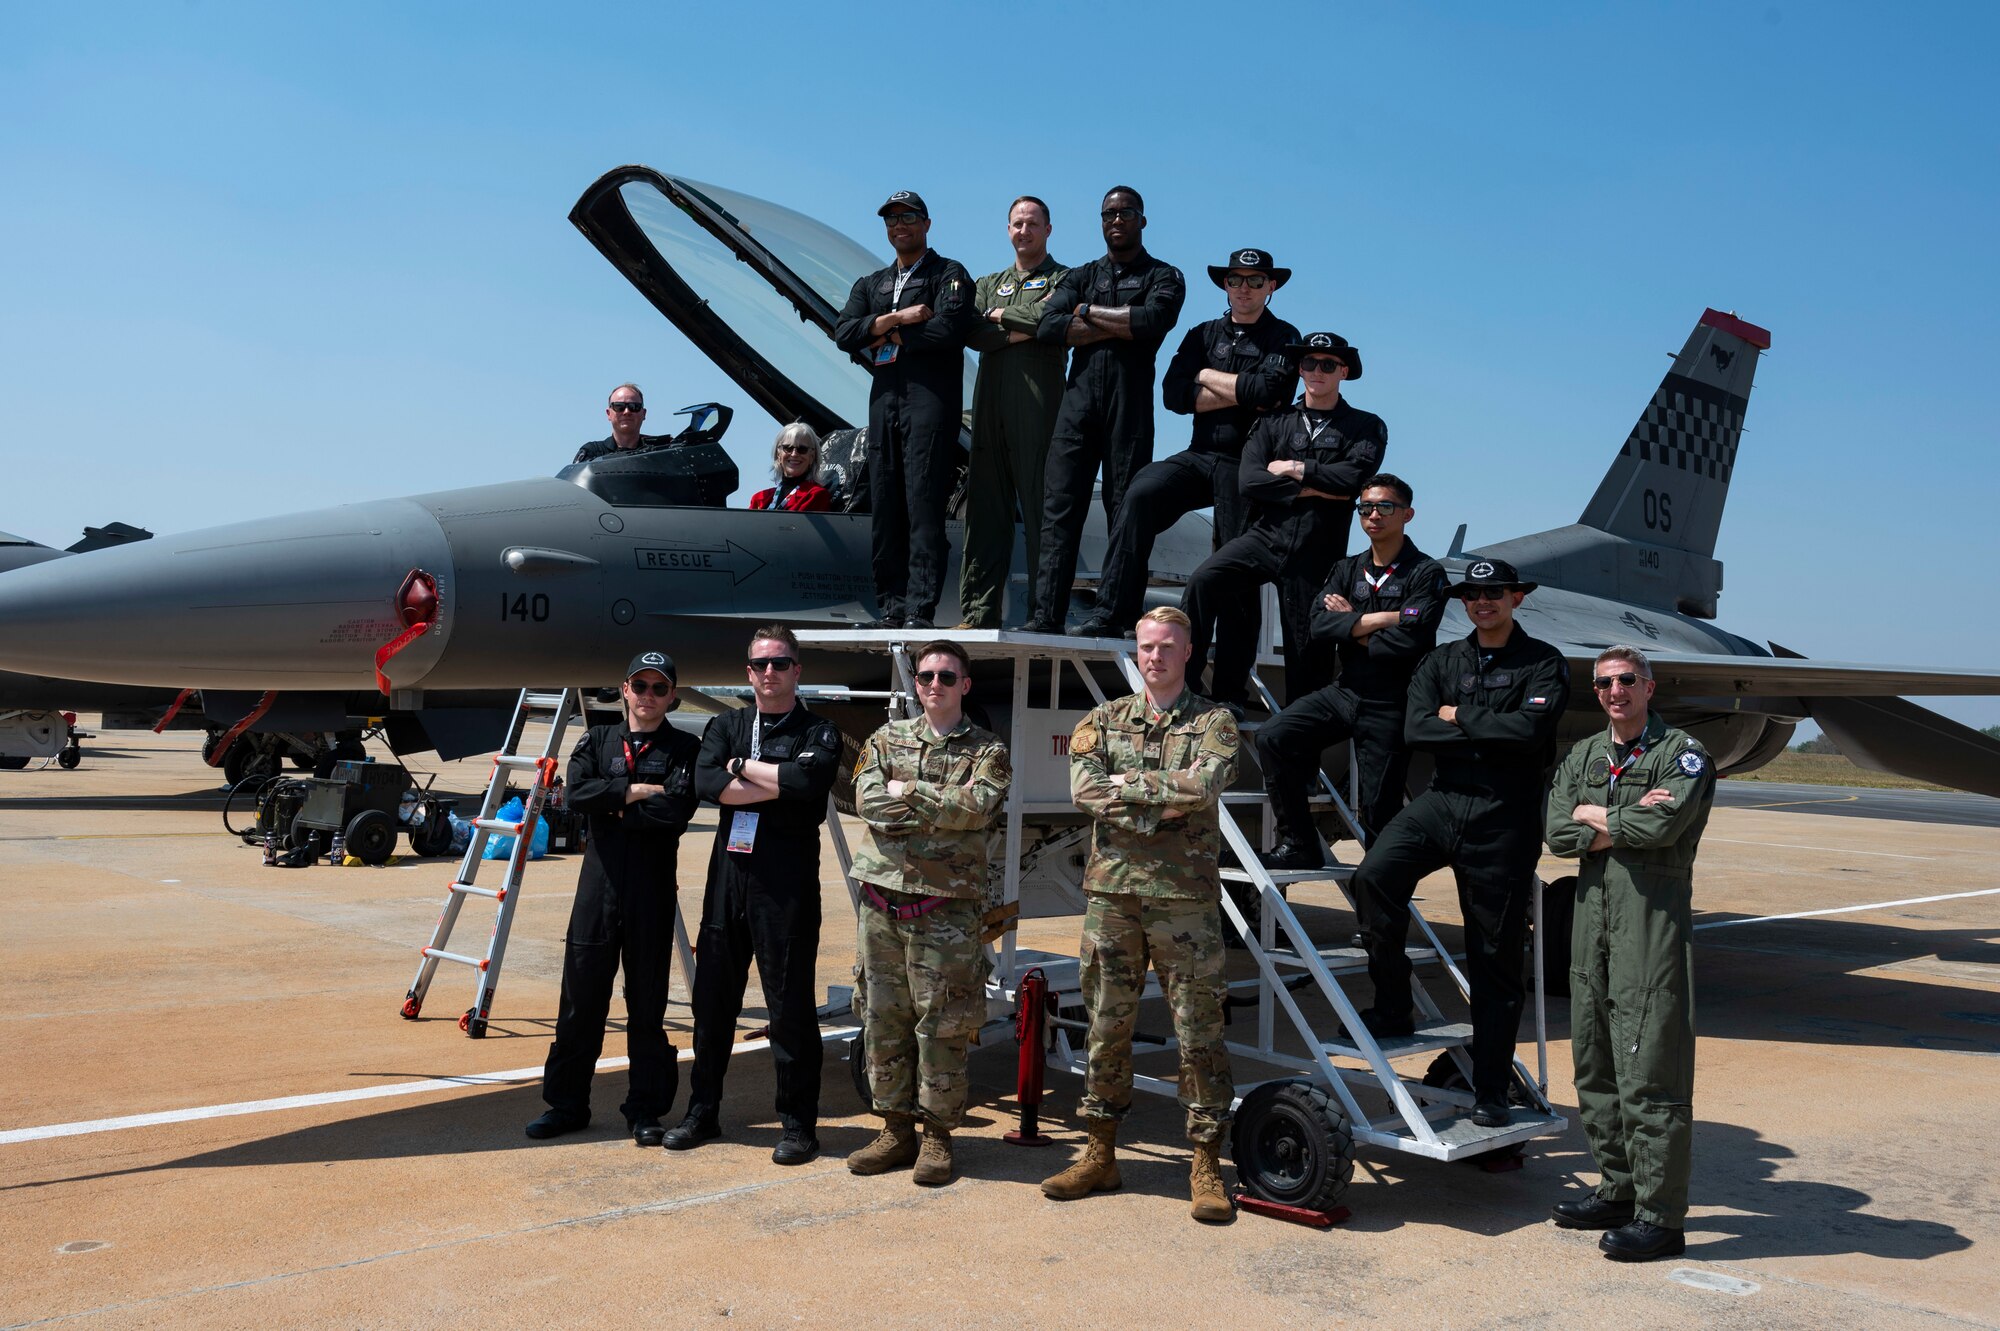 Group photo with members of the Pacific Air Forces F-16 Demonstration Team with plane behind them.